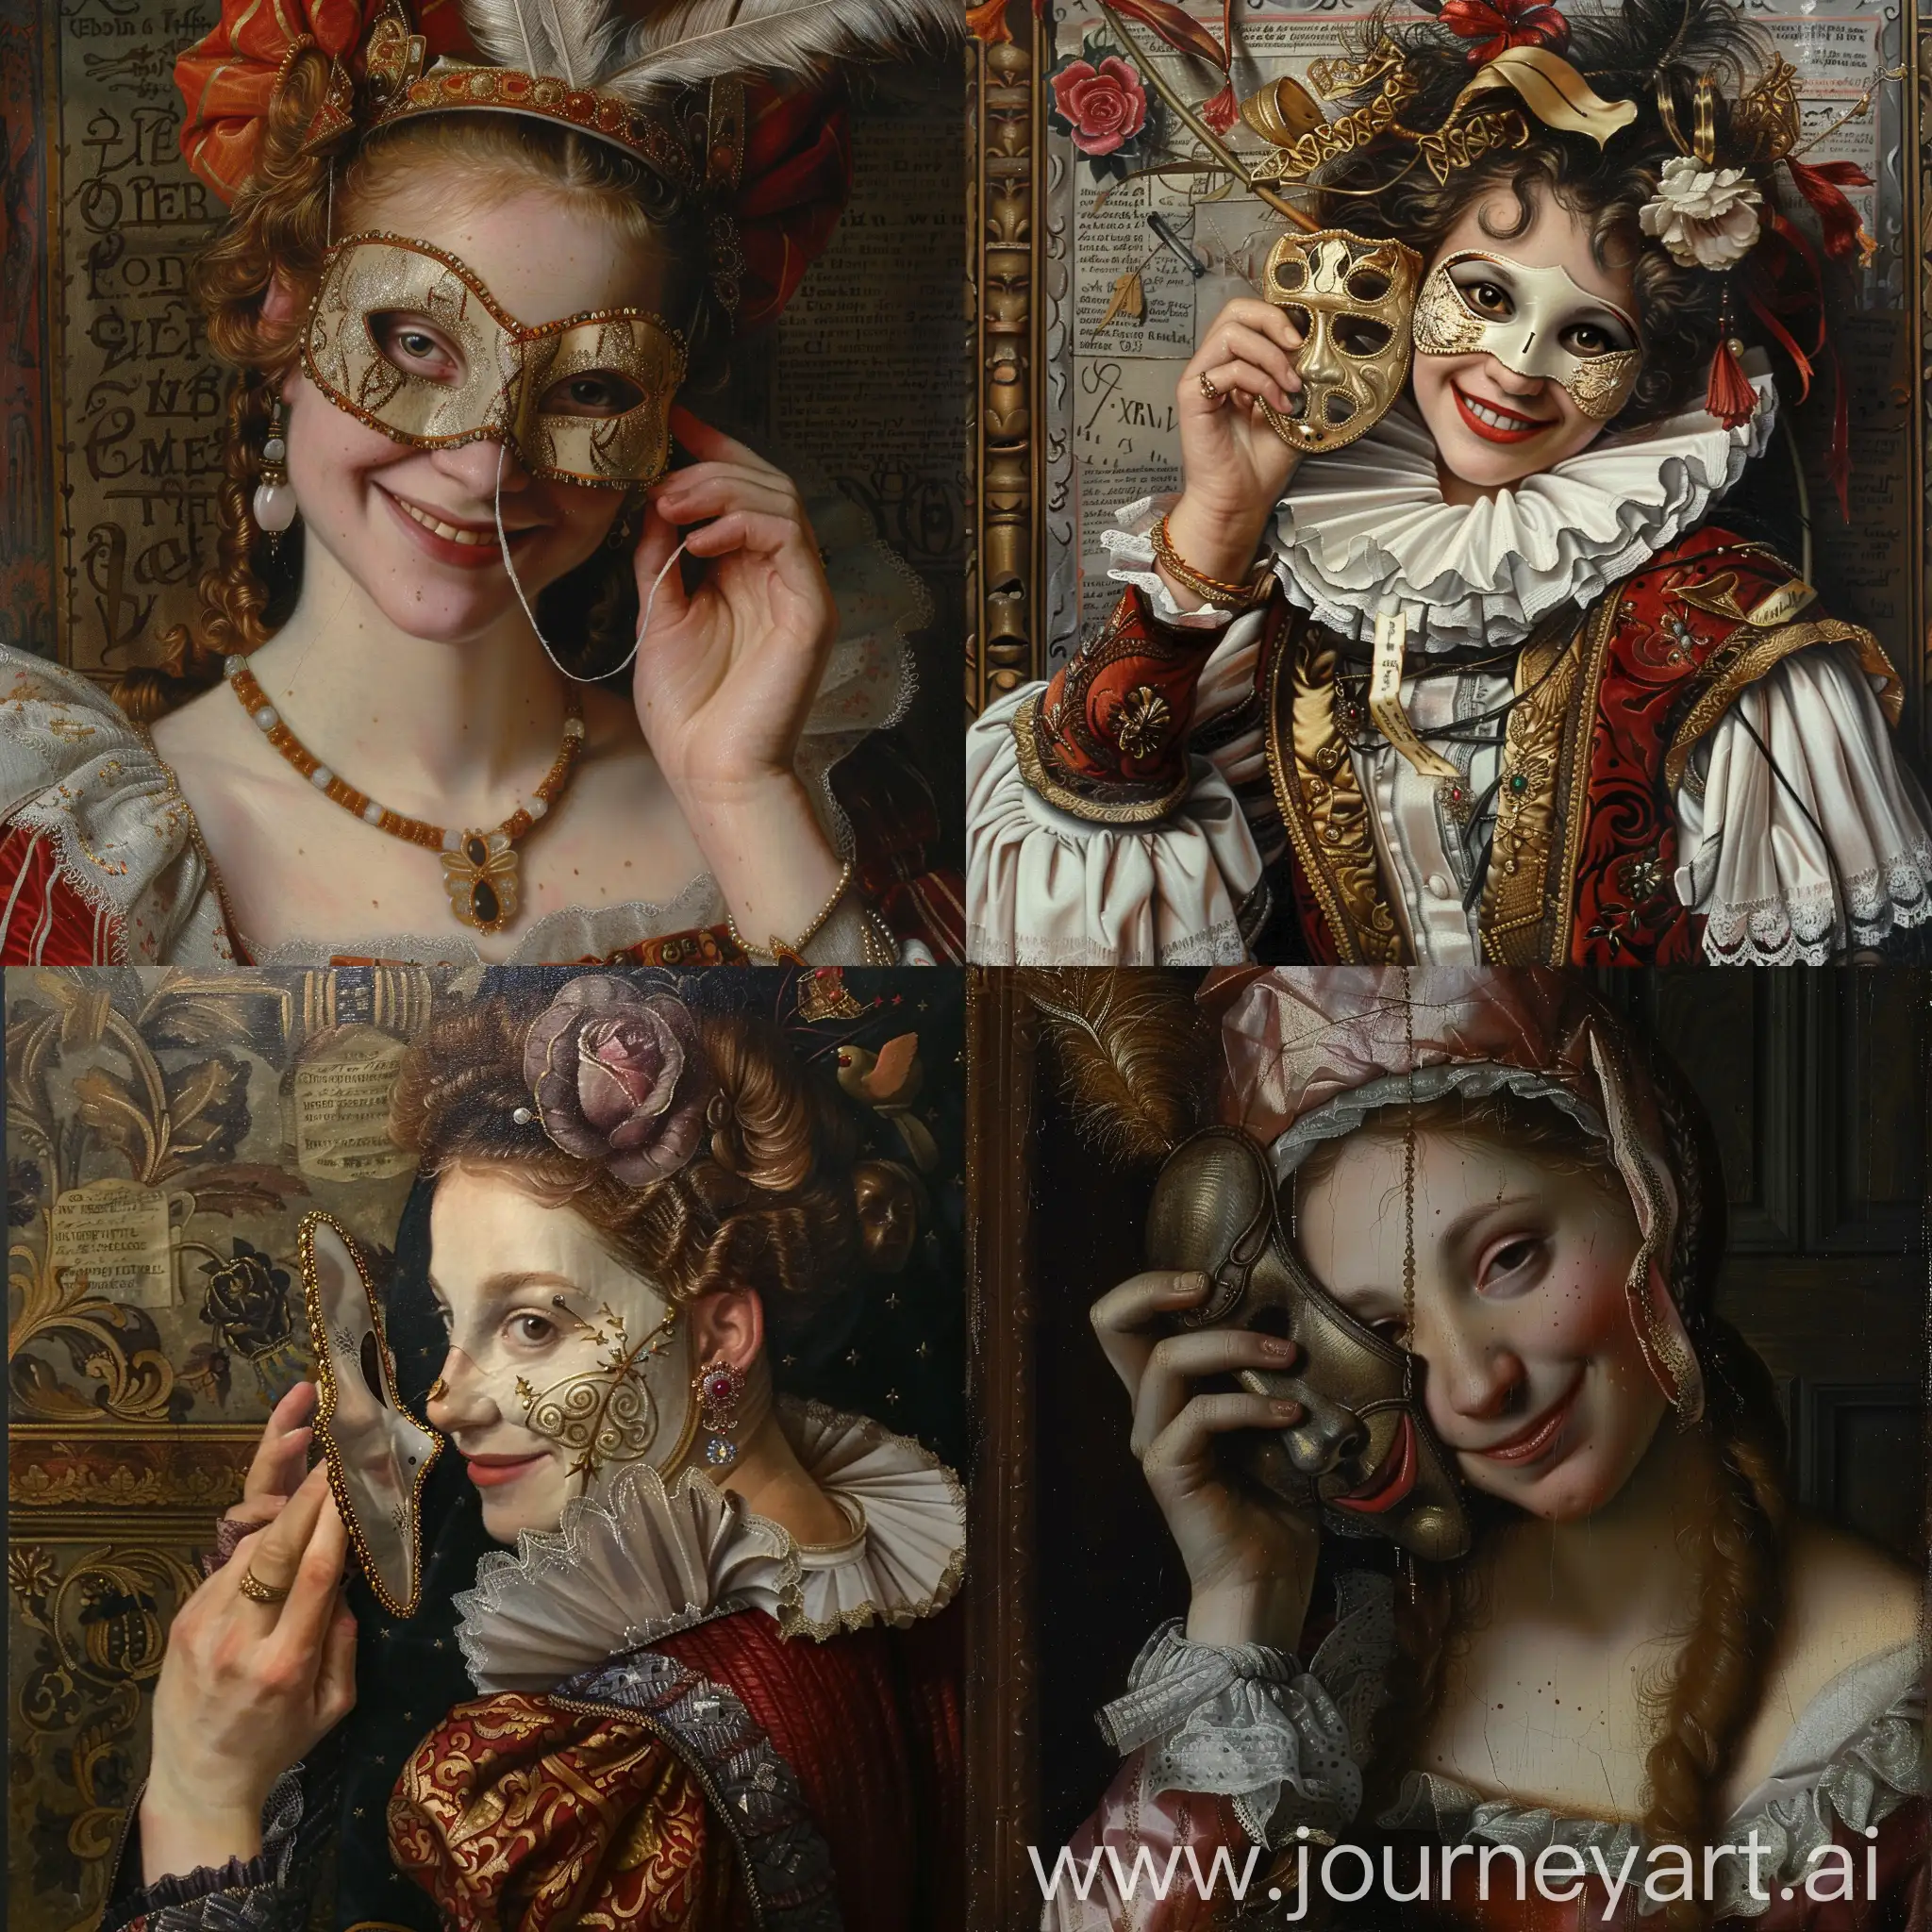 Renaissance-Girl-in-Masquerade-Costume-Smiling-with-Mask